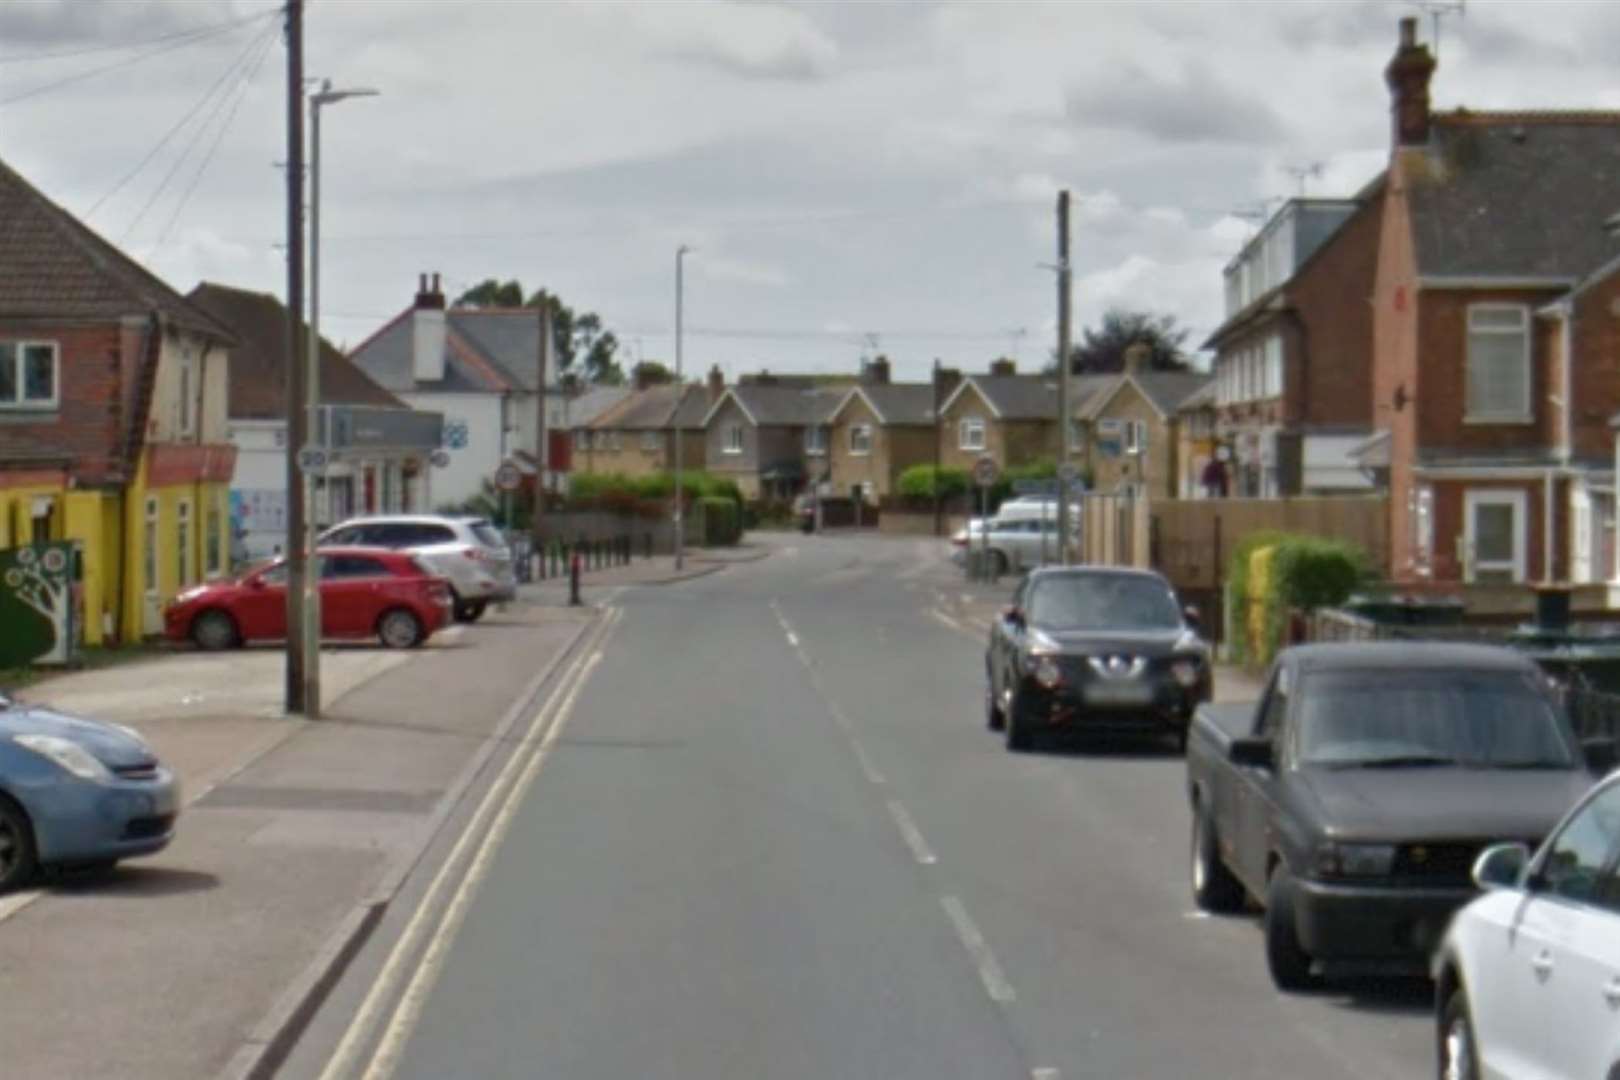 The incident happened in Hunter Road. Photo: Google Street View (42951532)